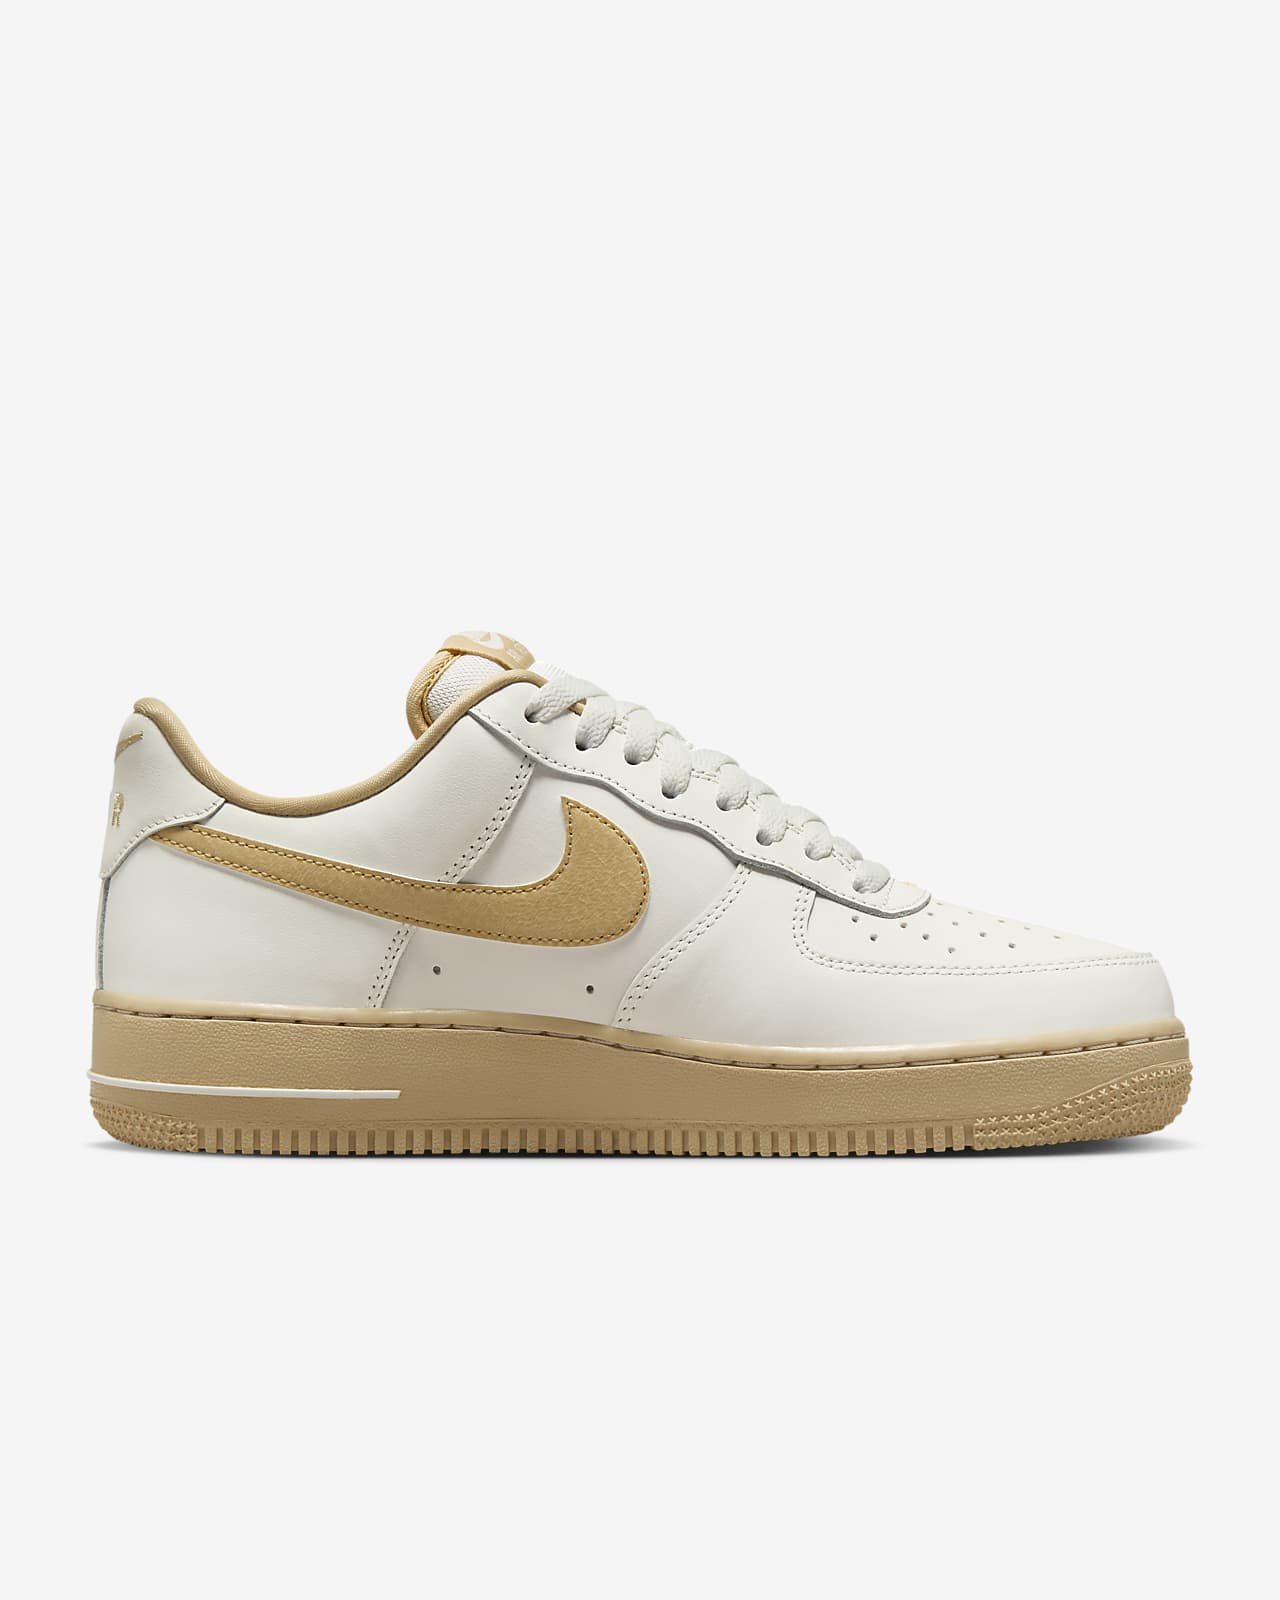 NIKE AIR FORCE 1 '07 LOW 27.5cmキッズ